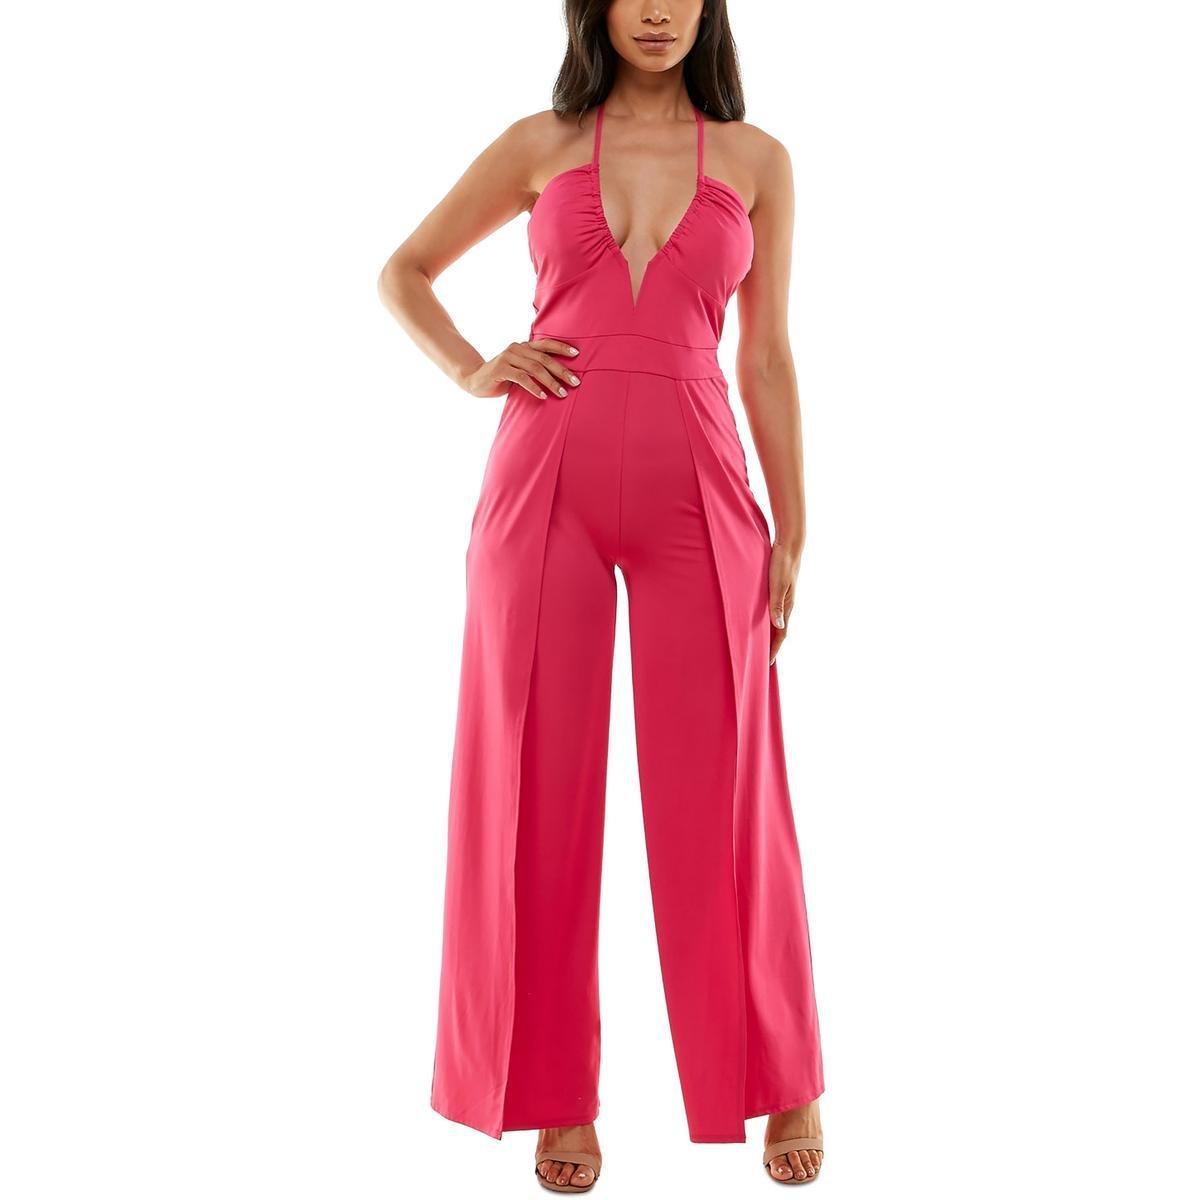 Bebe Womens Strappy Halter Jumpsuit by BEBE